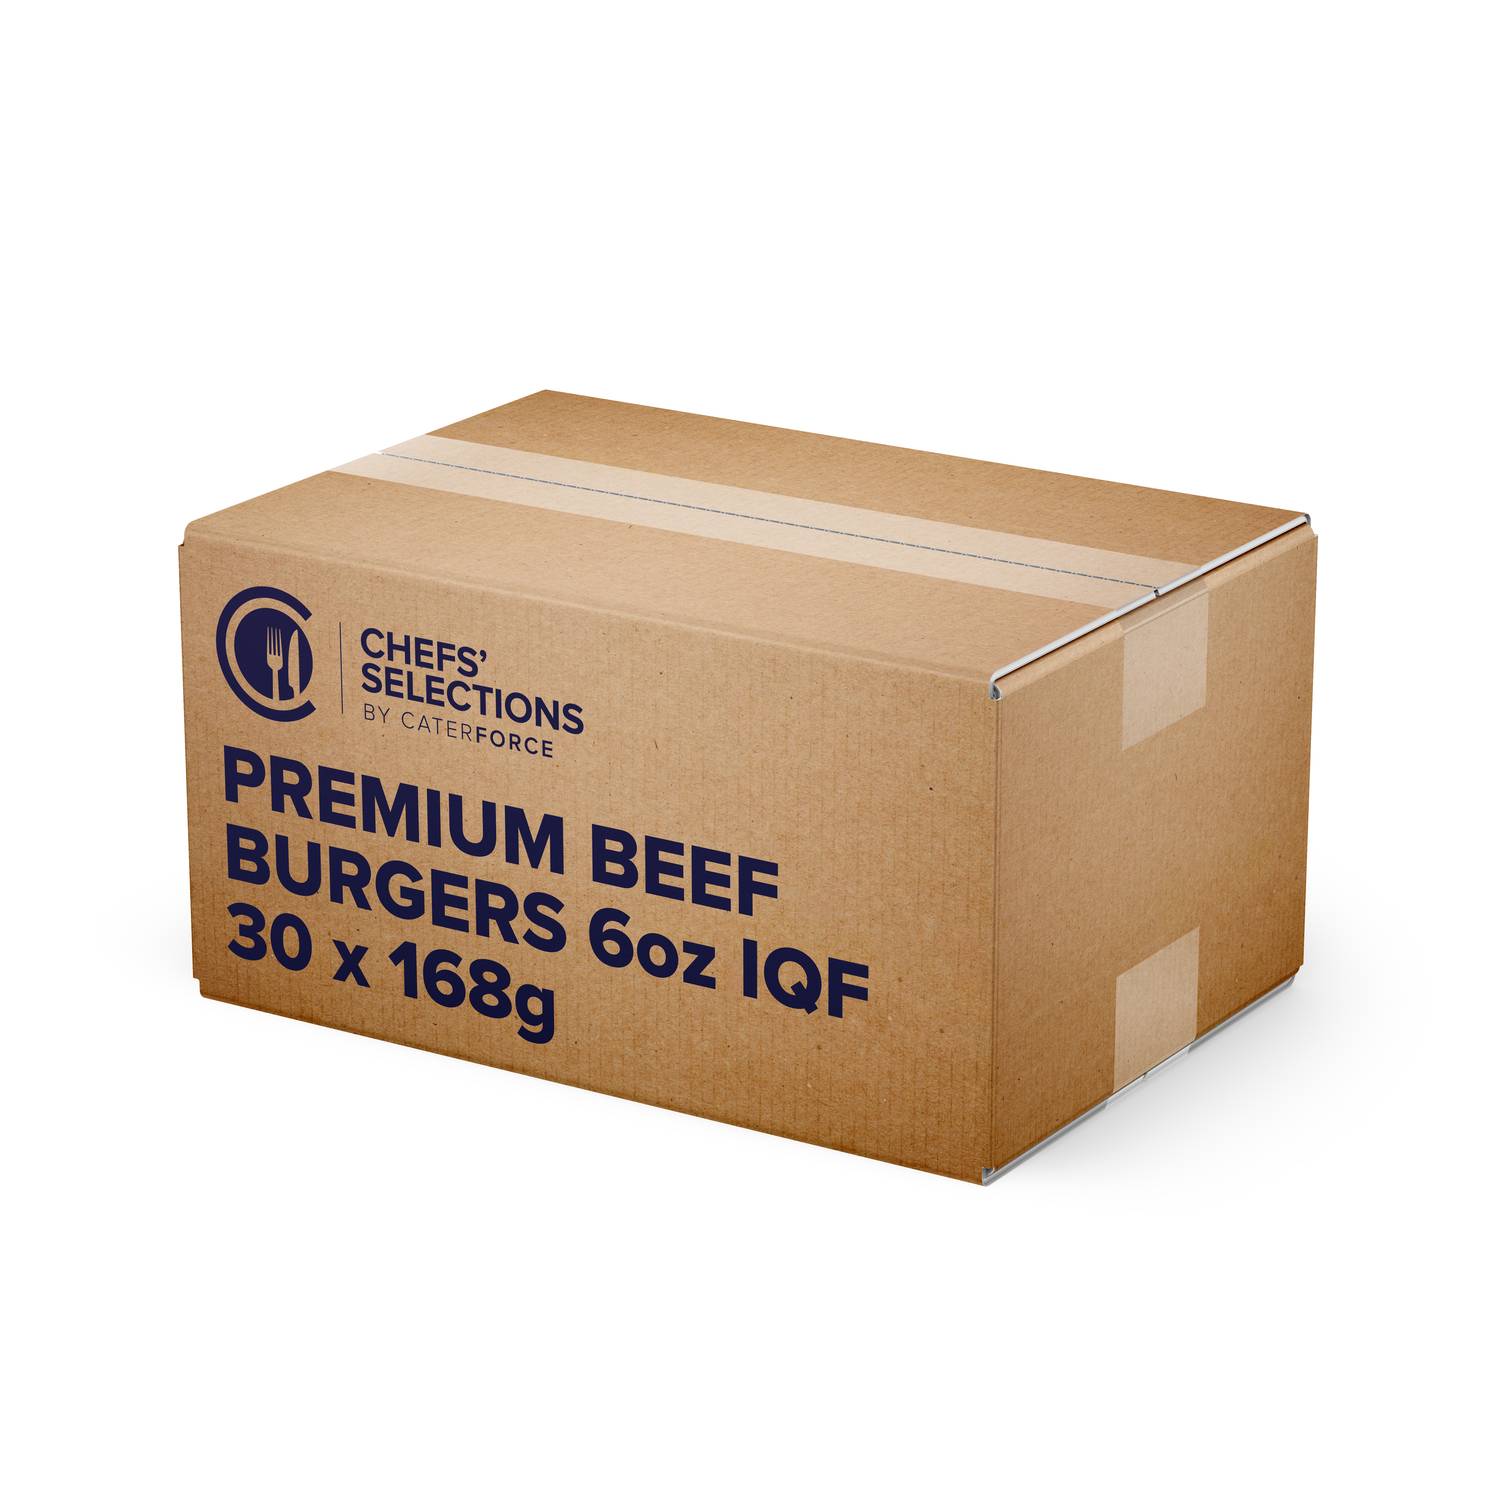 Chefs’ Selections Premium Beef Burger 6oz IQF (30 x 168g)